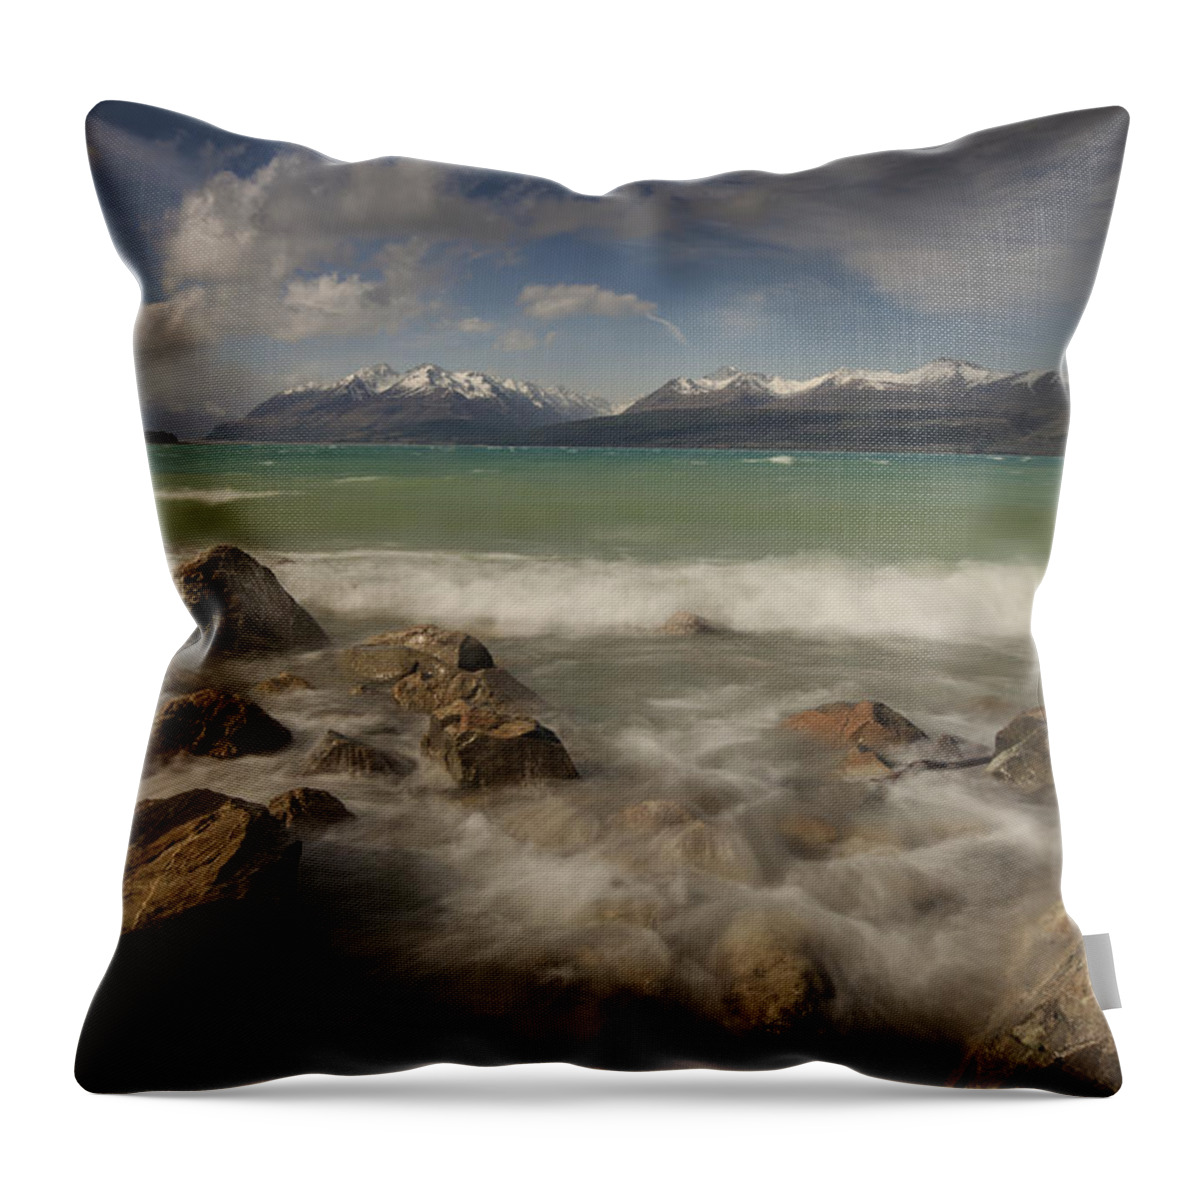 00498849 Throw Pillow featuring the photograph Wind Storm On Lake Pukaki by Colin Monteath